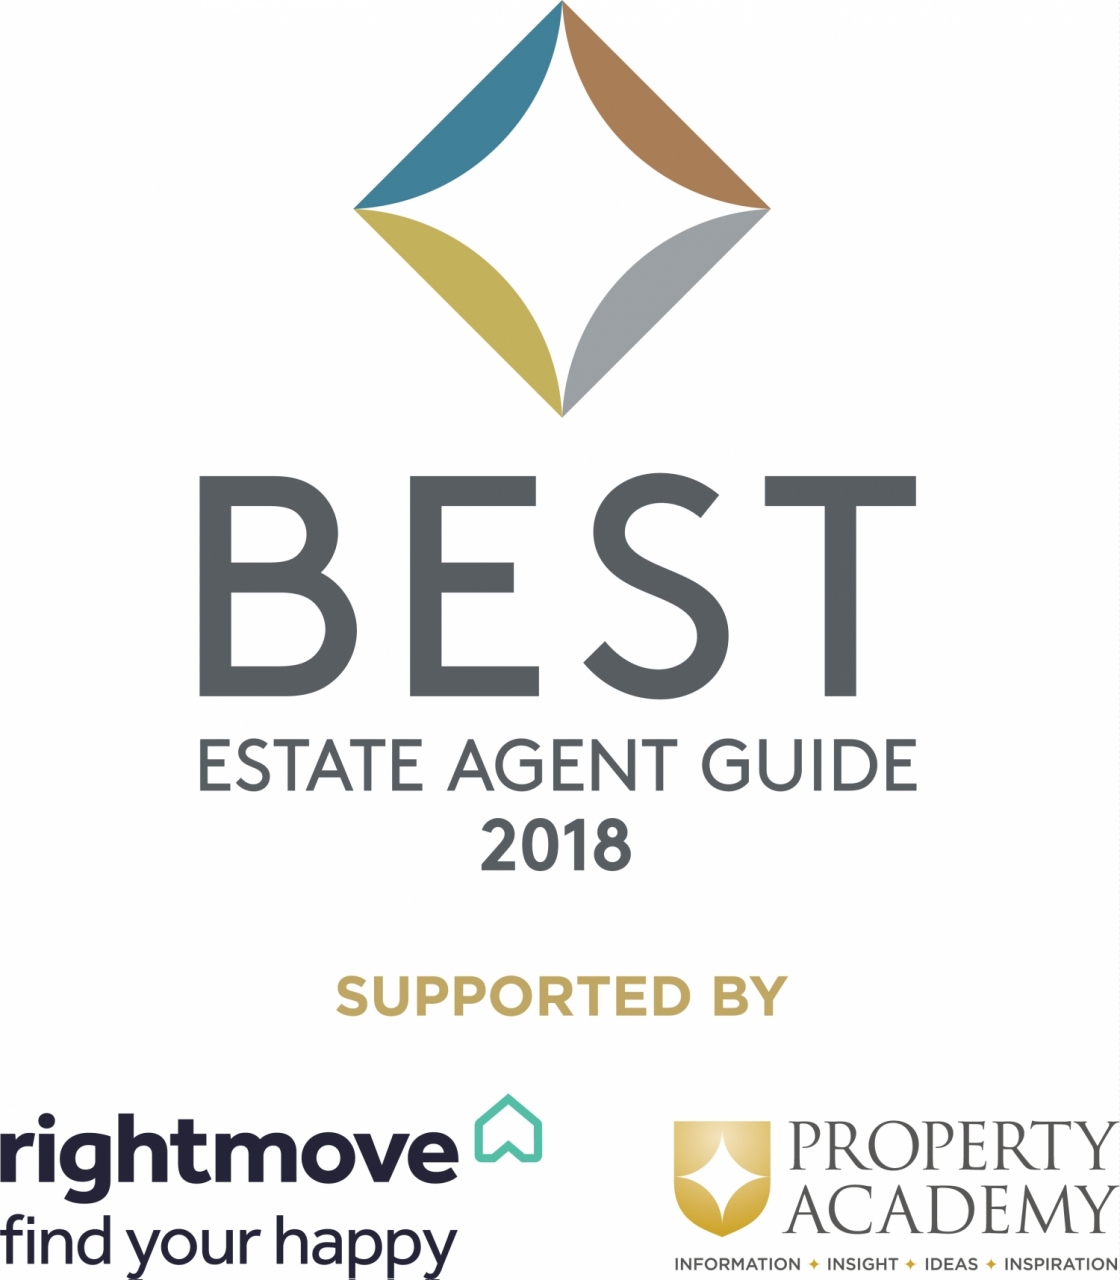 >Best Estate Agents in the UK